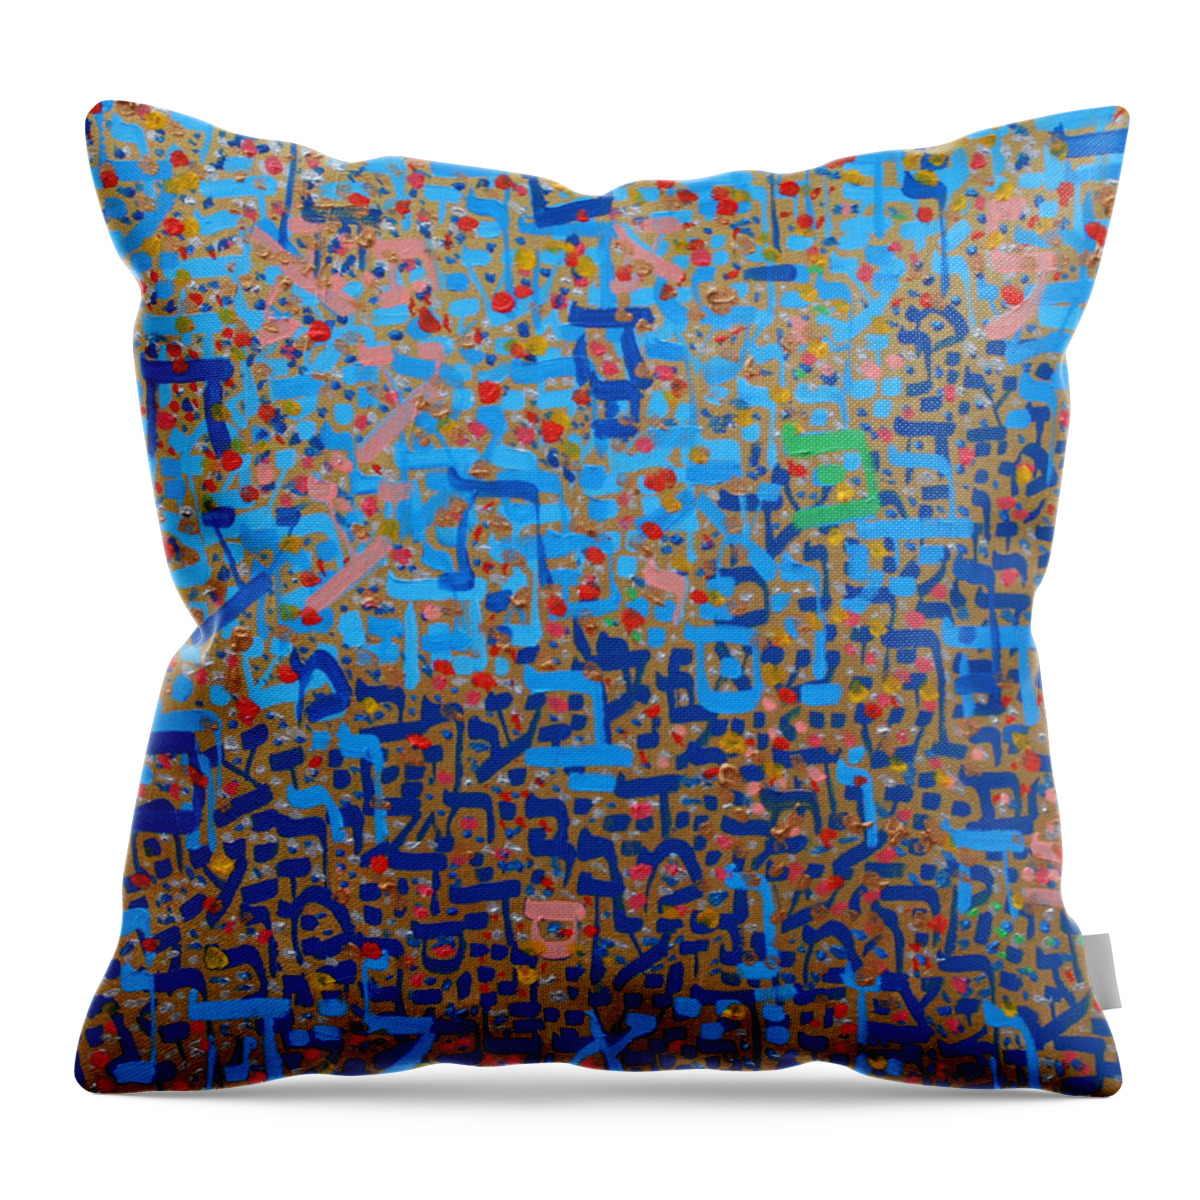 Judaica Throw Pillow featuring the painting 2014 20 Psalms 20 Hebrew Text of in Blue and Other Colors on Gold by Alyse Radenovic